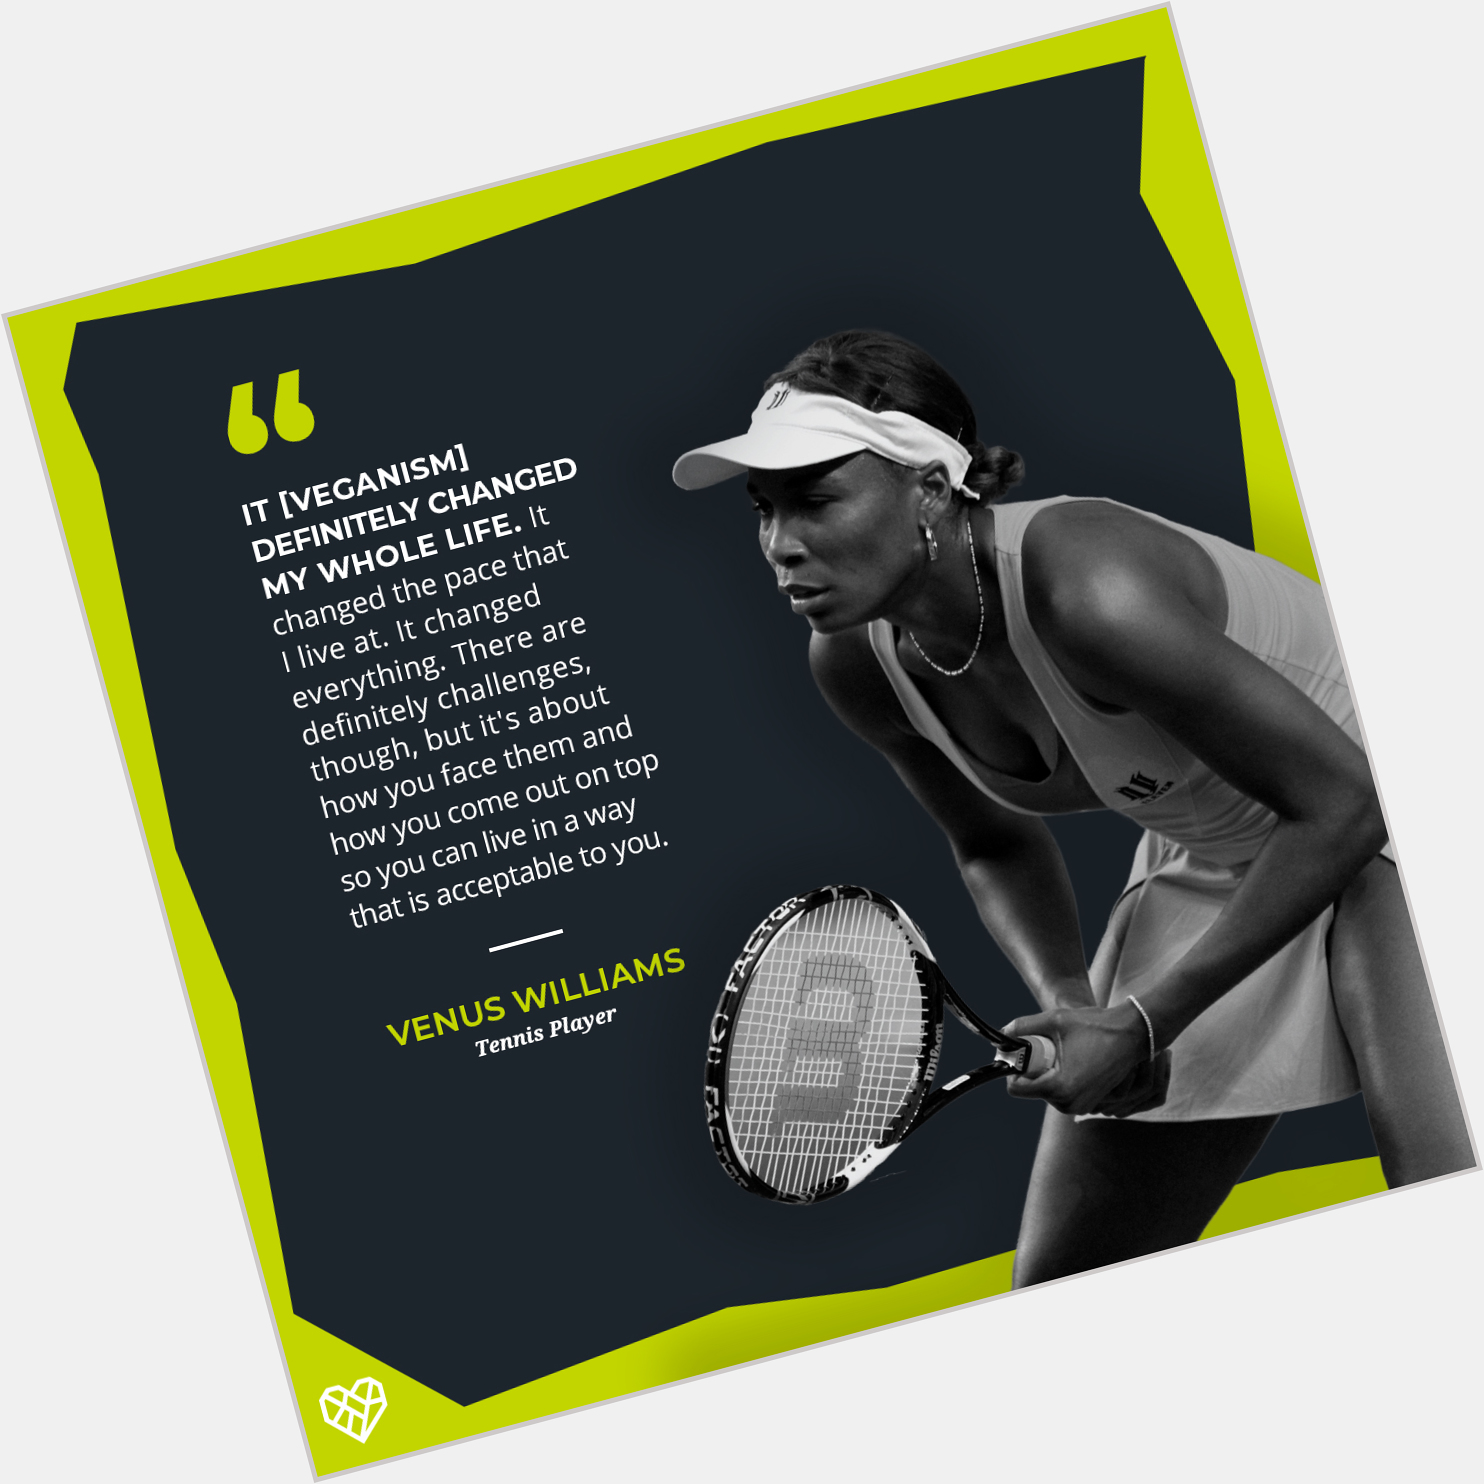 Happy Birthday, Venus Williams! Thank you for being a compassionate champion! 